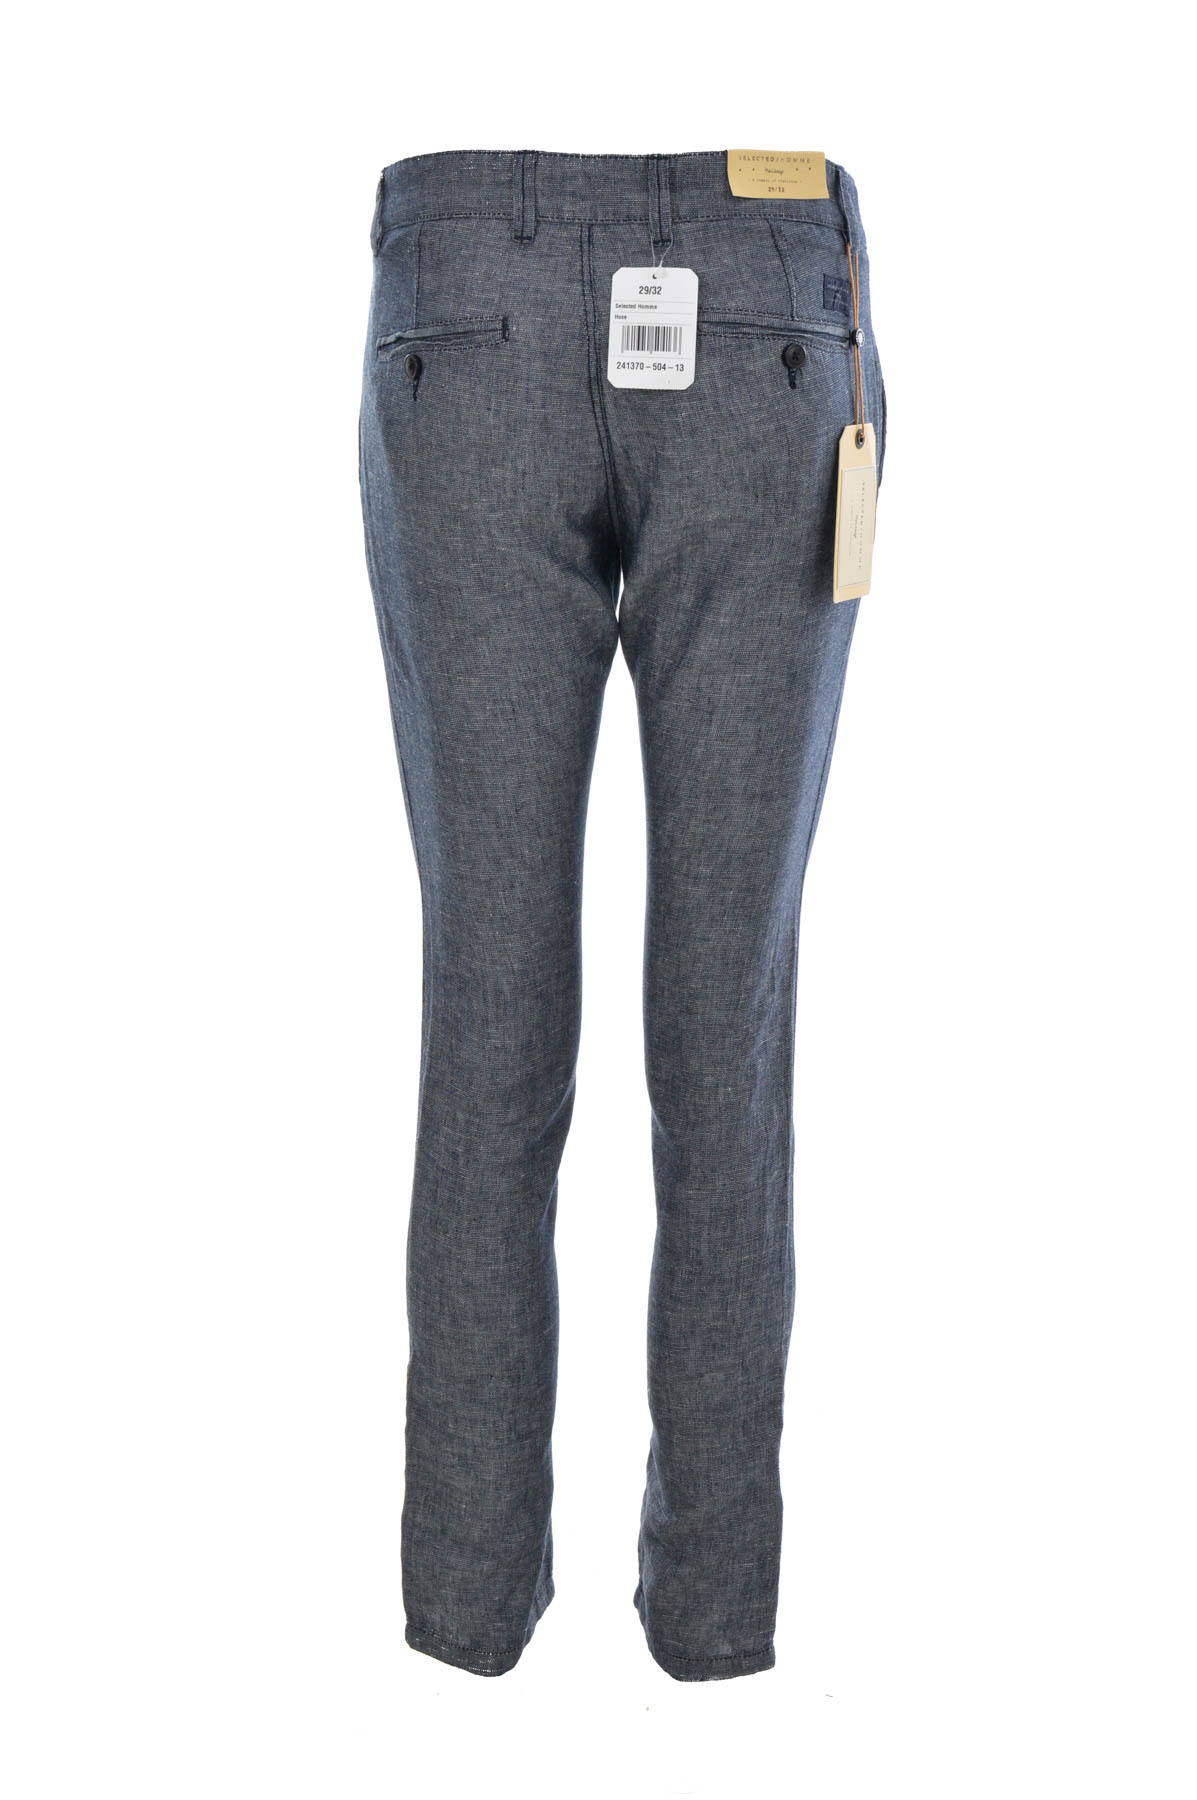 Men's trousers - SELECTED / HOMME - 1